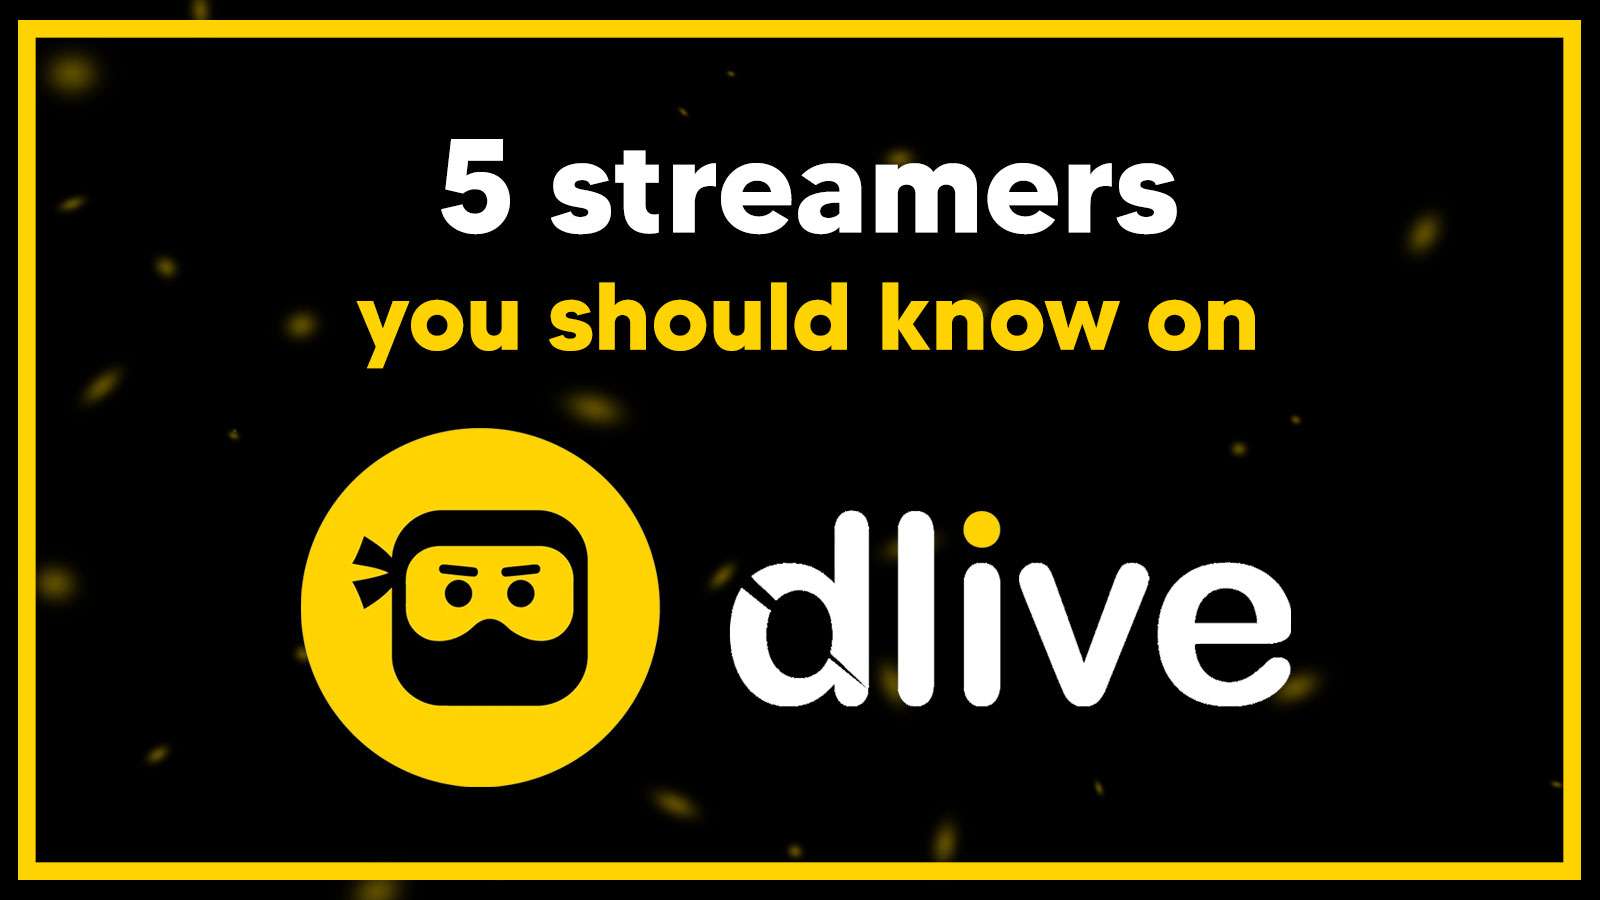 dlive streamers